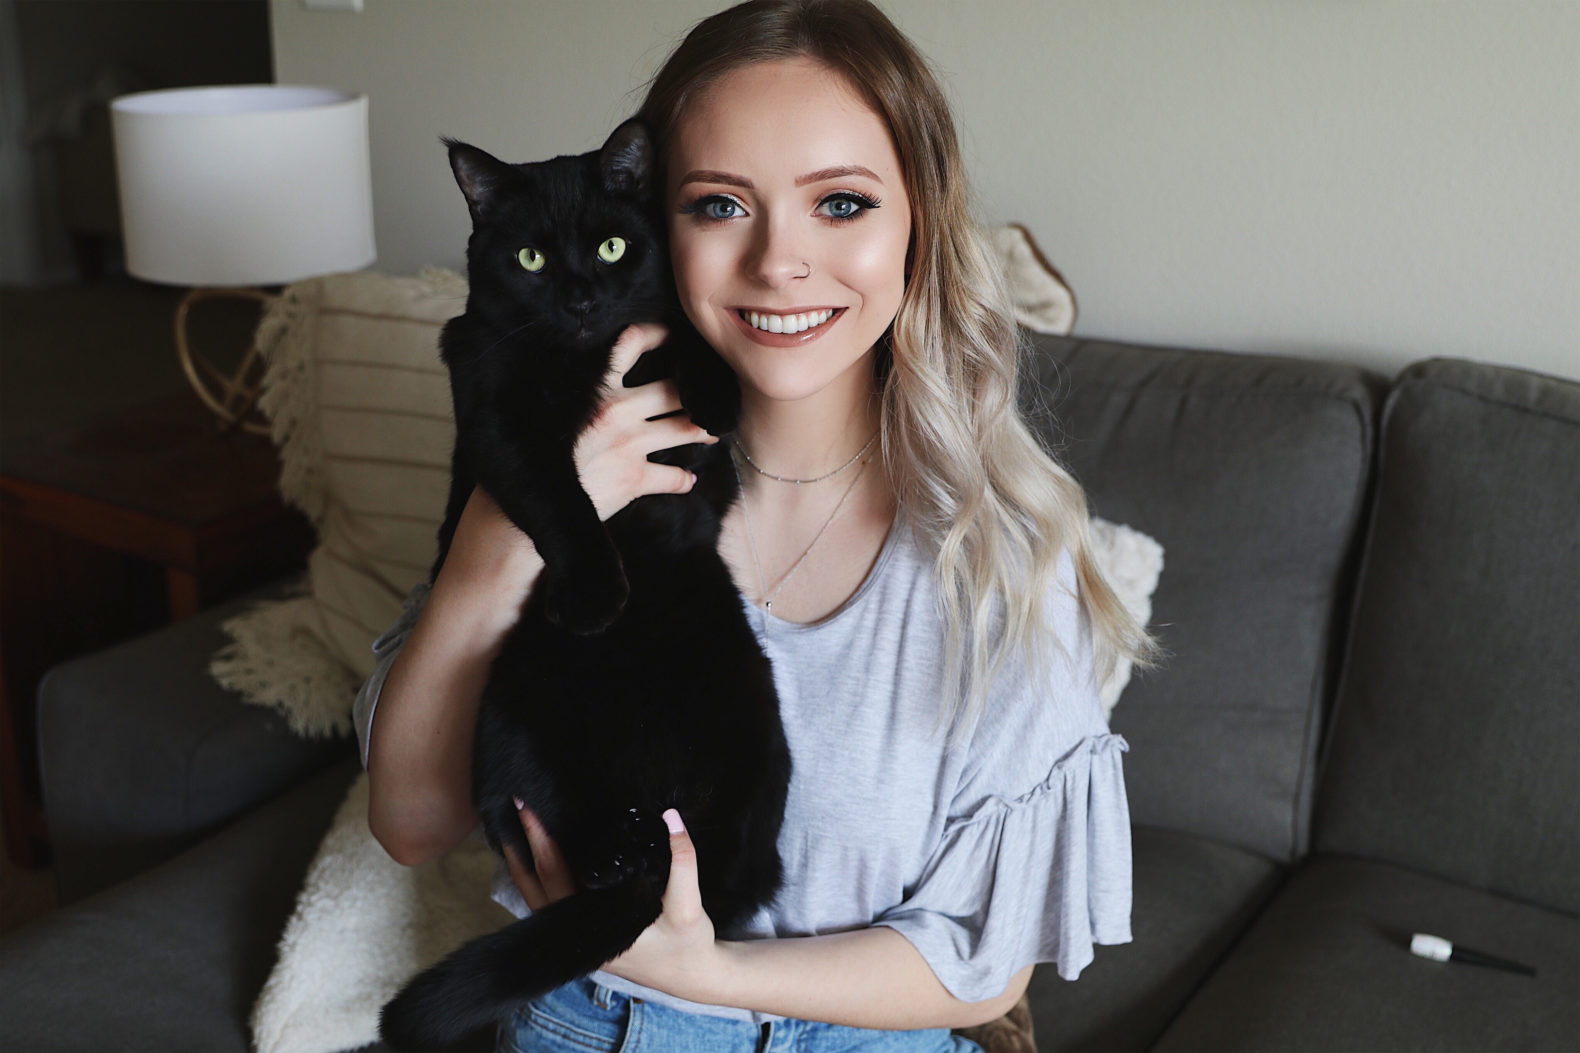 Female presenting person with blonde hair and beige shirt poses for the camera on her couch holding a black cat with yellow eyes. She is smiling and the cat appears calm and happy in her arms.